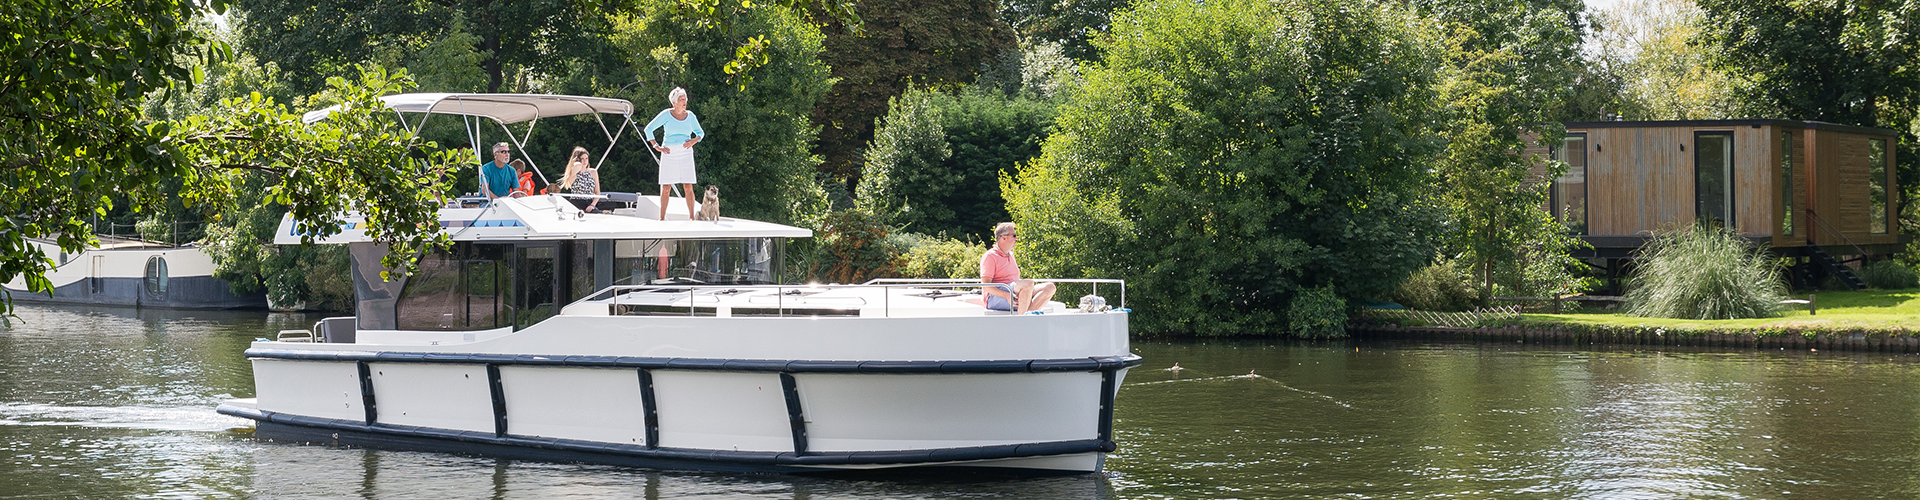 Le Boat - Staycations in England 